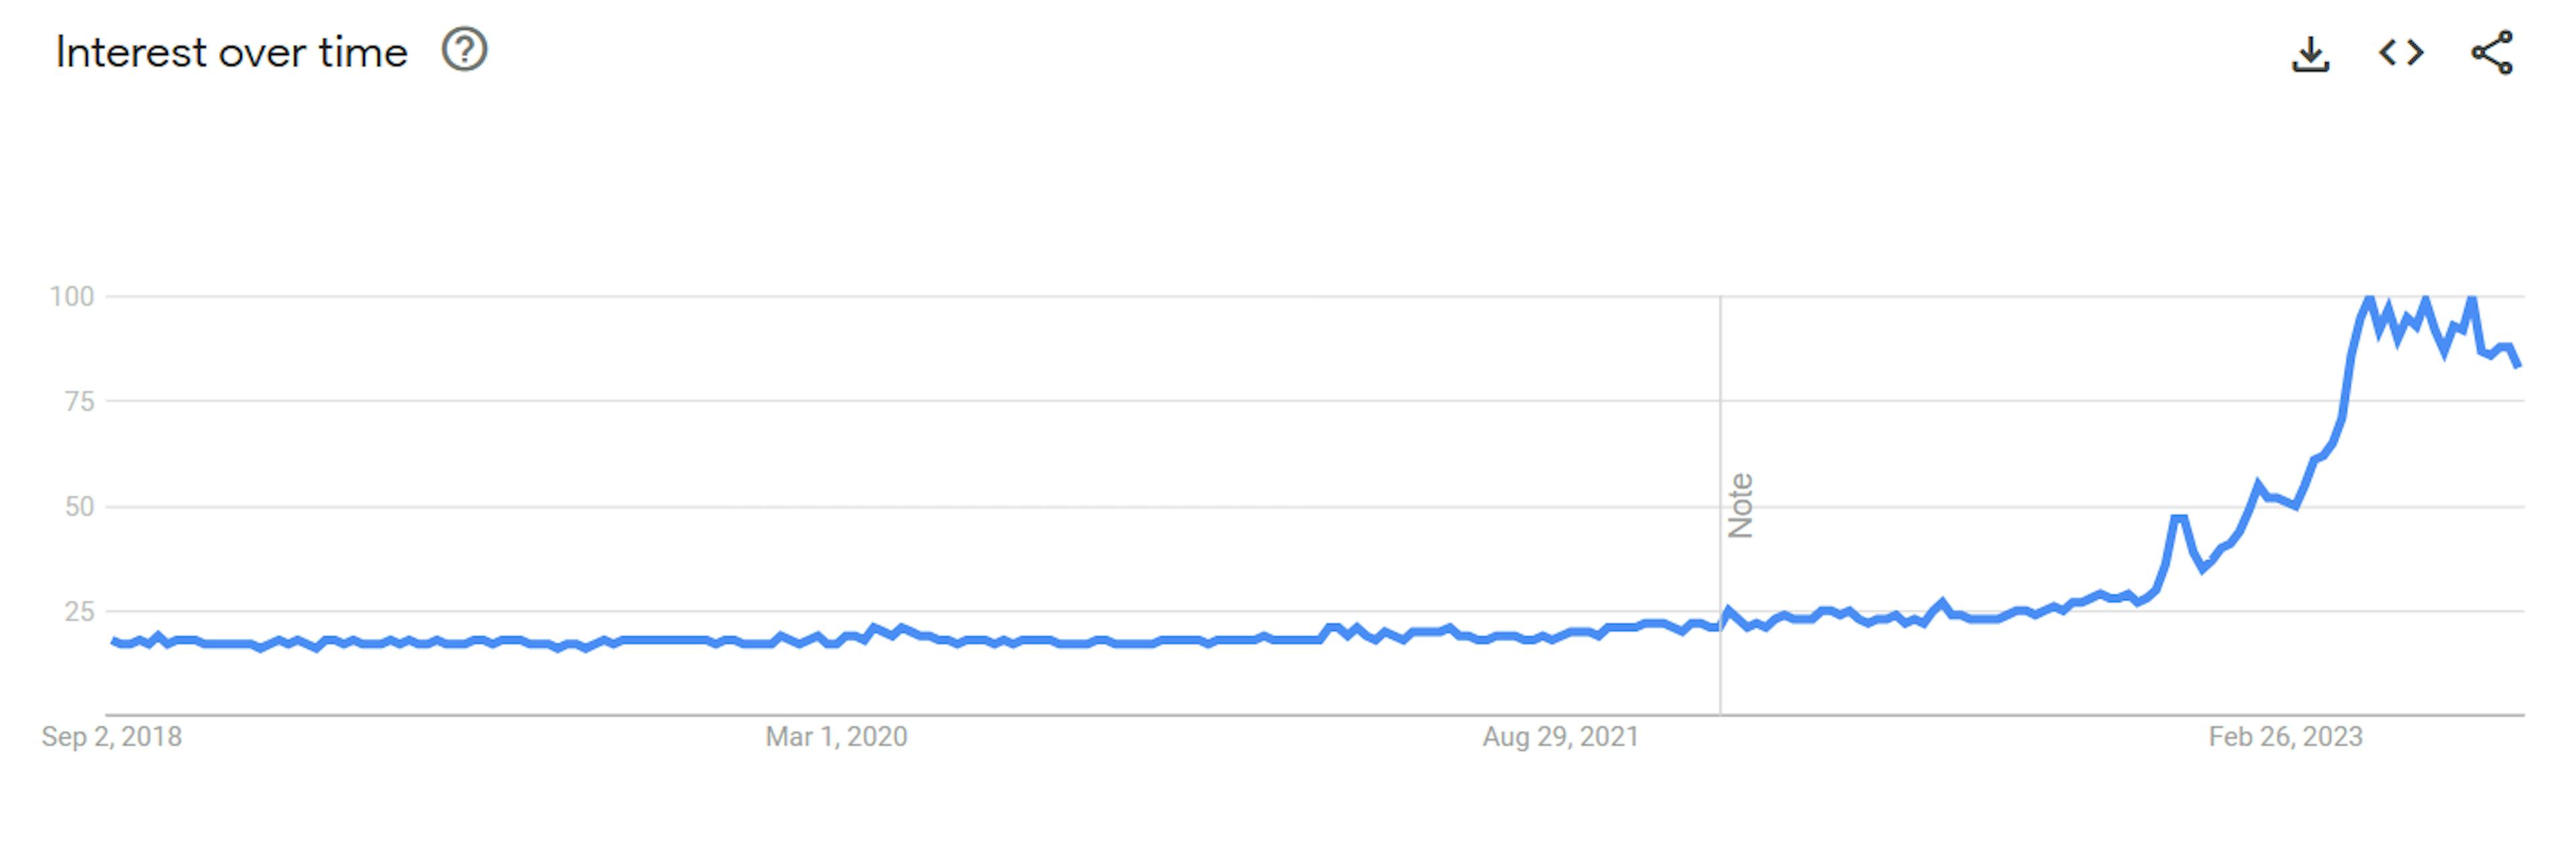 Google Trends - Interest over time graph for the past 5 years for the term 'AI'